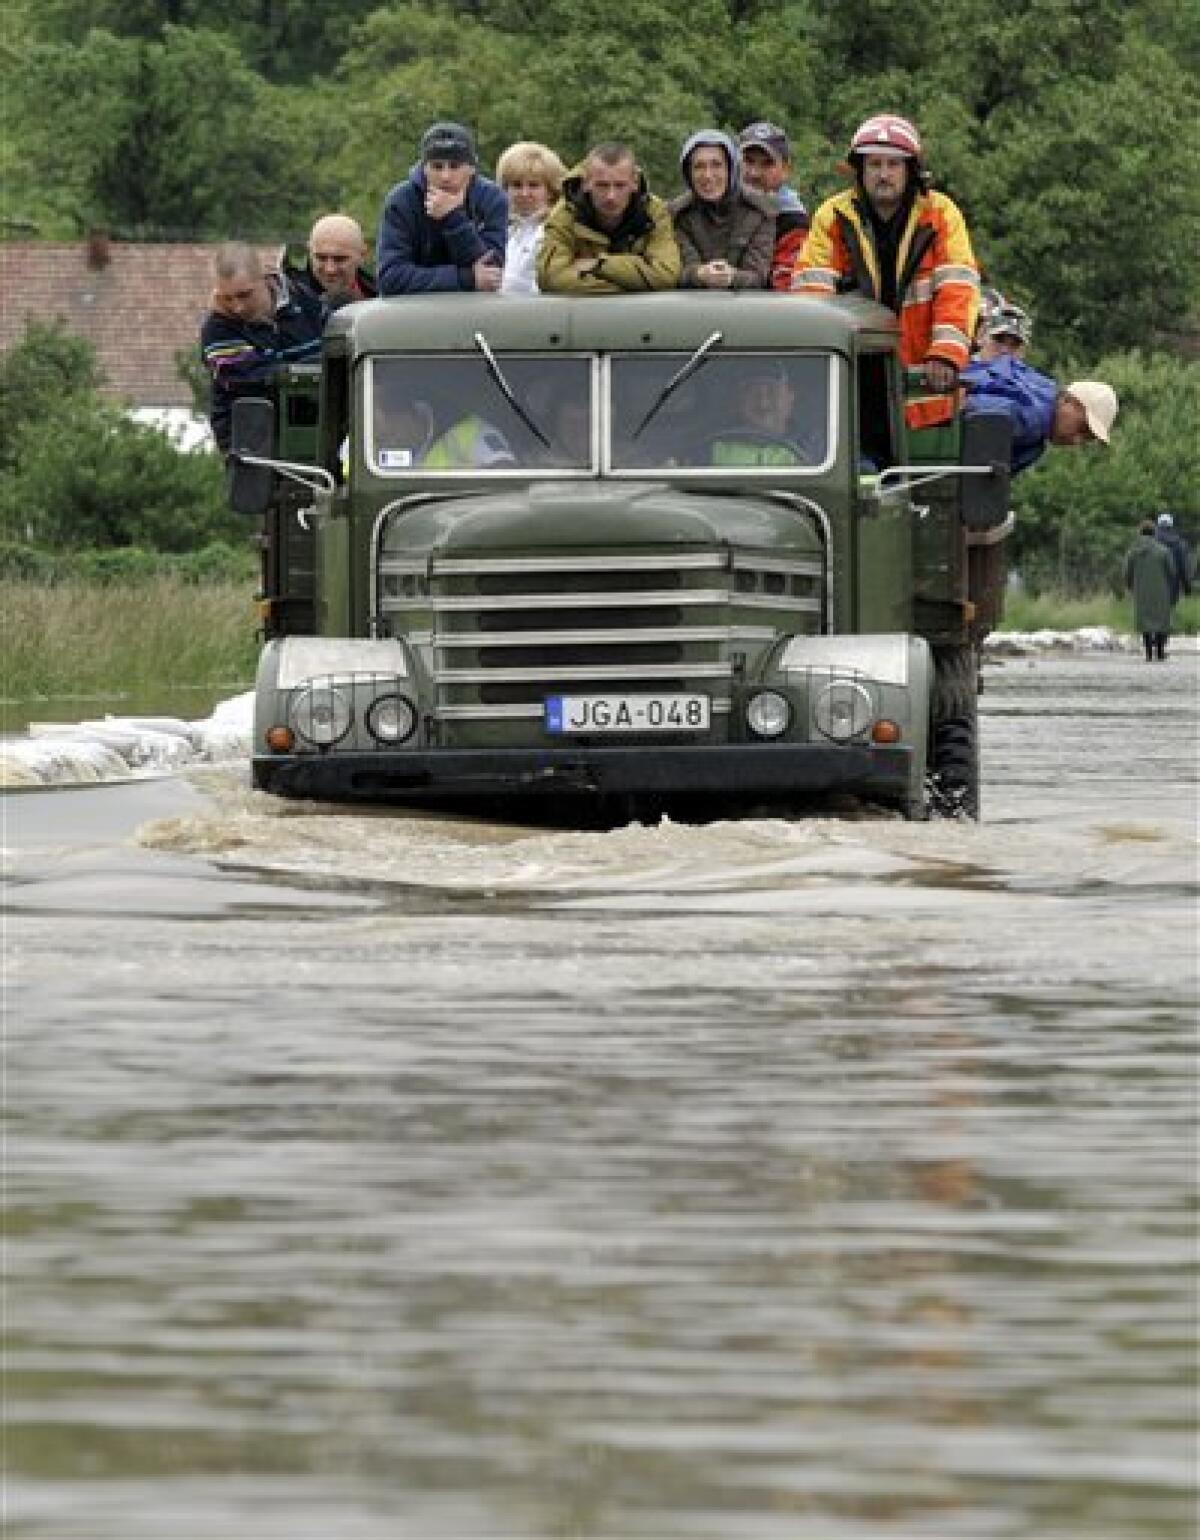 Villagers are being evacuated through an over-flooded road after the rising water surrounded their houses in Kiskinizs, northeastern Hungary, Tuesday, May 18, 2010. Several swollen rivers causing floods throughout Hungary, while roads remain closed due to the unusual wet weather and heavy rains. Heavy rains that began in central Europe last weekend also are causing flooding in areas of Poland , Slovakia and the Czech Republic, with rivers bursting their banks and inundating low-lying homes and roads, and cutting off villages. (AP Photo/Bela Szandelszky)